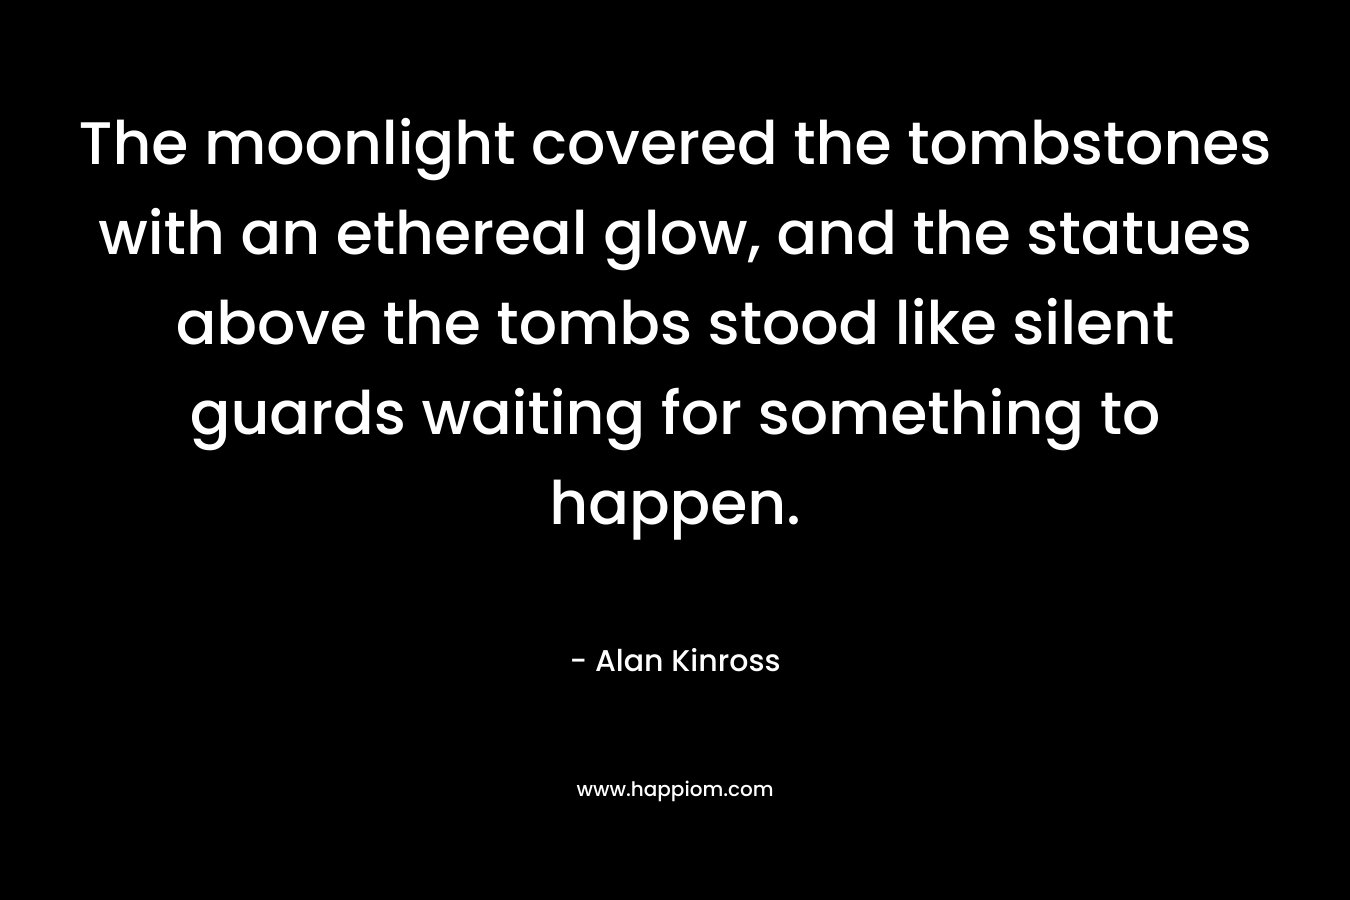 The moonlight covered the tombstones with an ethereal glow, and the statues above the tombs stood like silent guards waiting for something to happen. – Alan Kinross